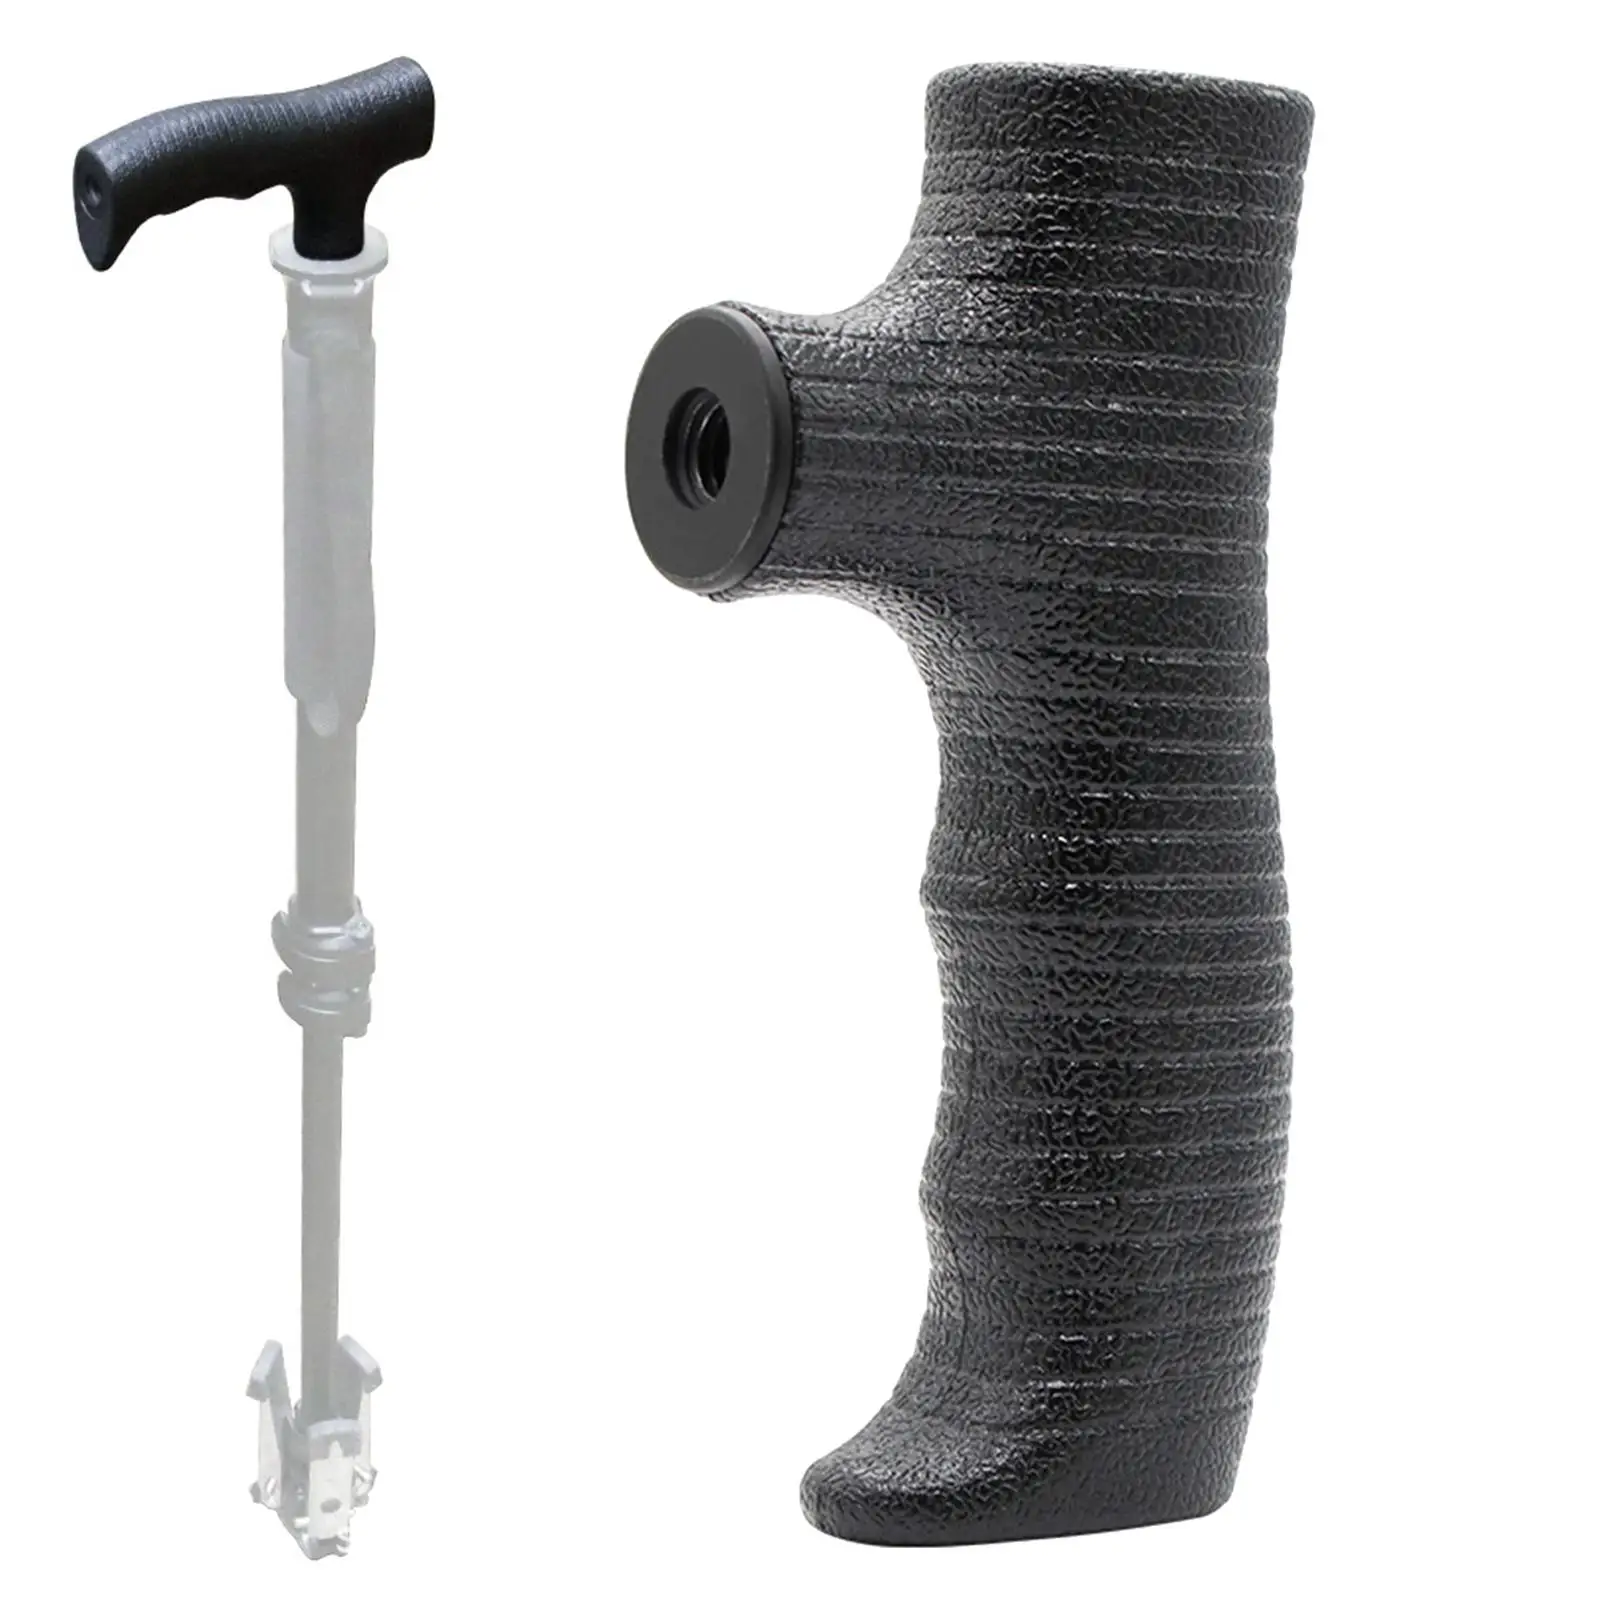 Walking Sticks Cane Hand Grip Trekking Pole Handle Spare Parts Supplies Repair Parts Accs Replacement for Rock Climbing Crutch